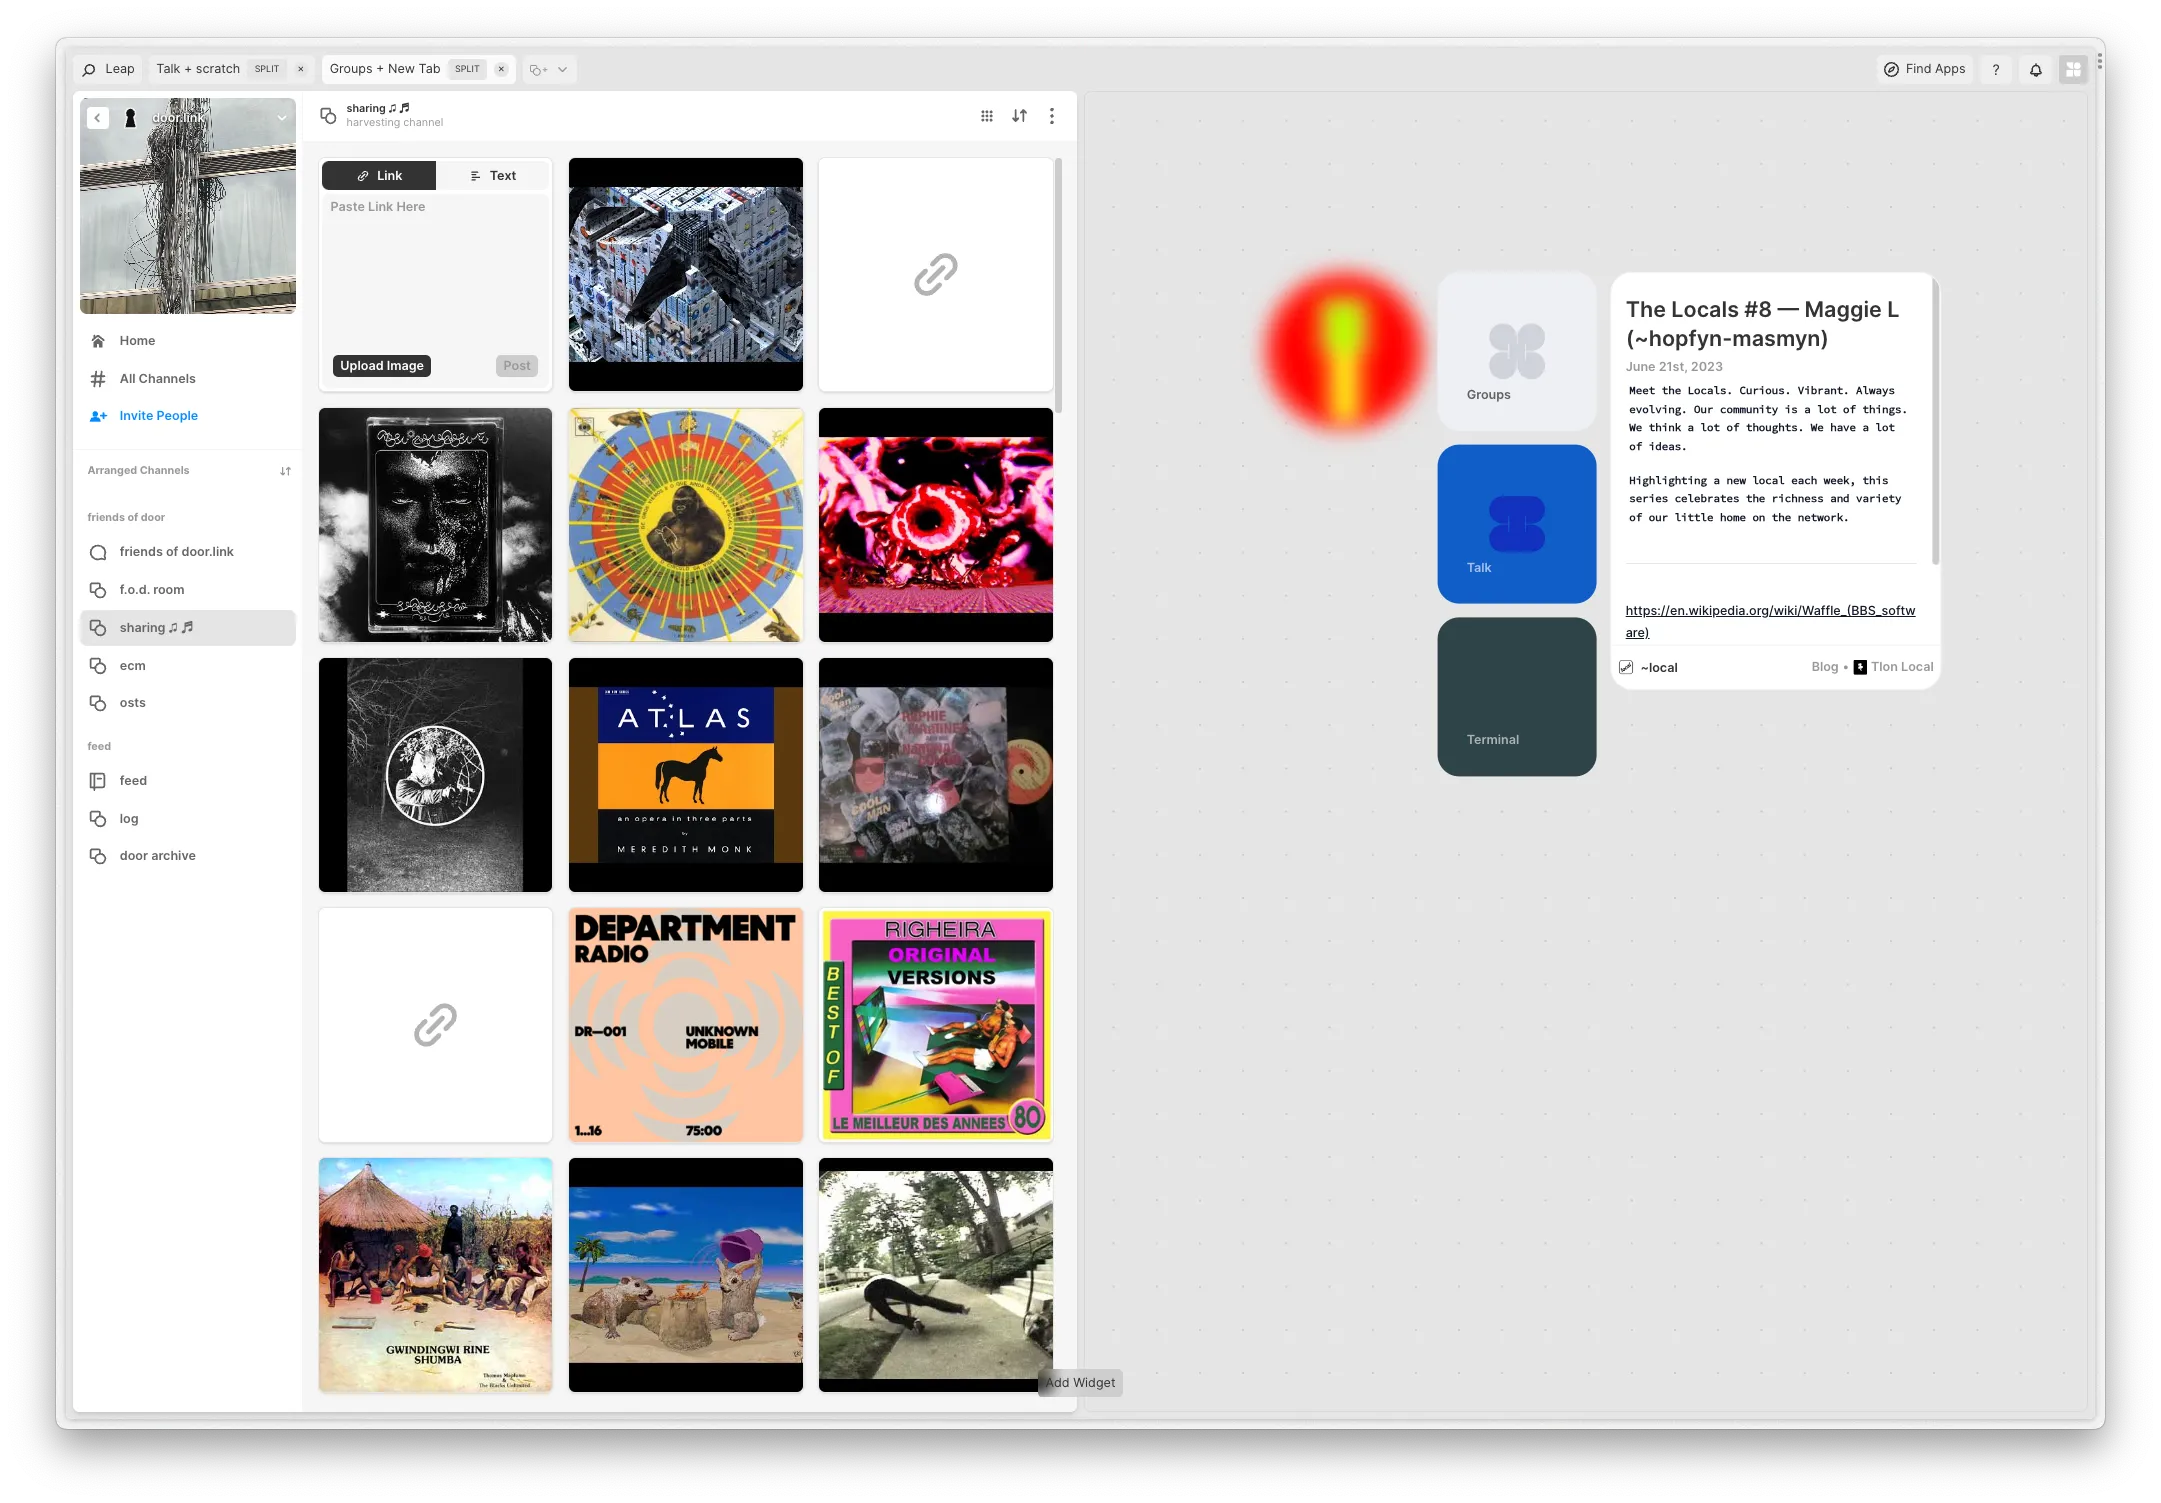 A screenshot of Surface showcasing two apps side-by-side one another: Gallery and Clocks